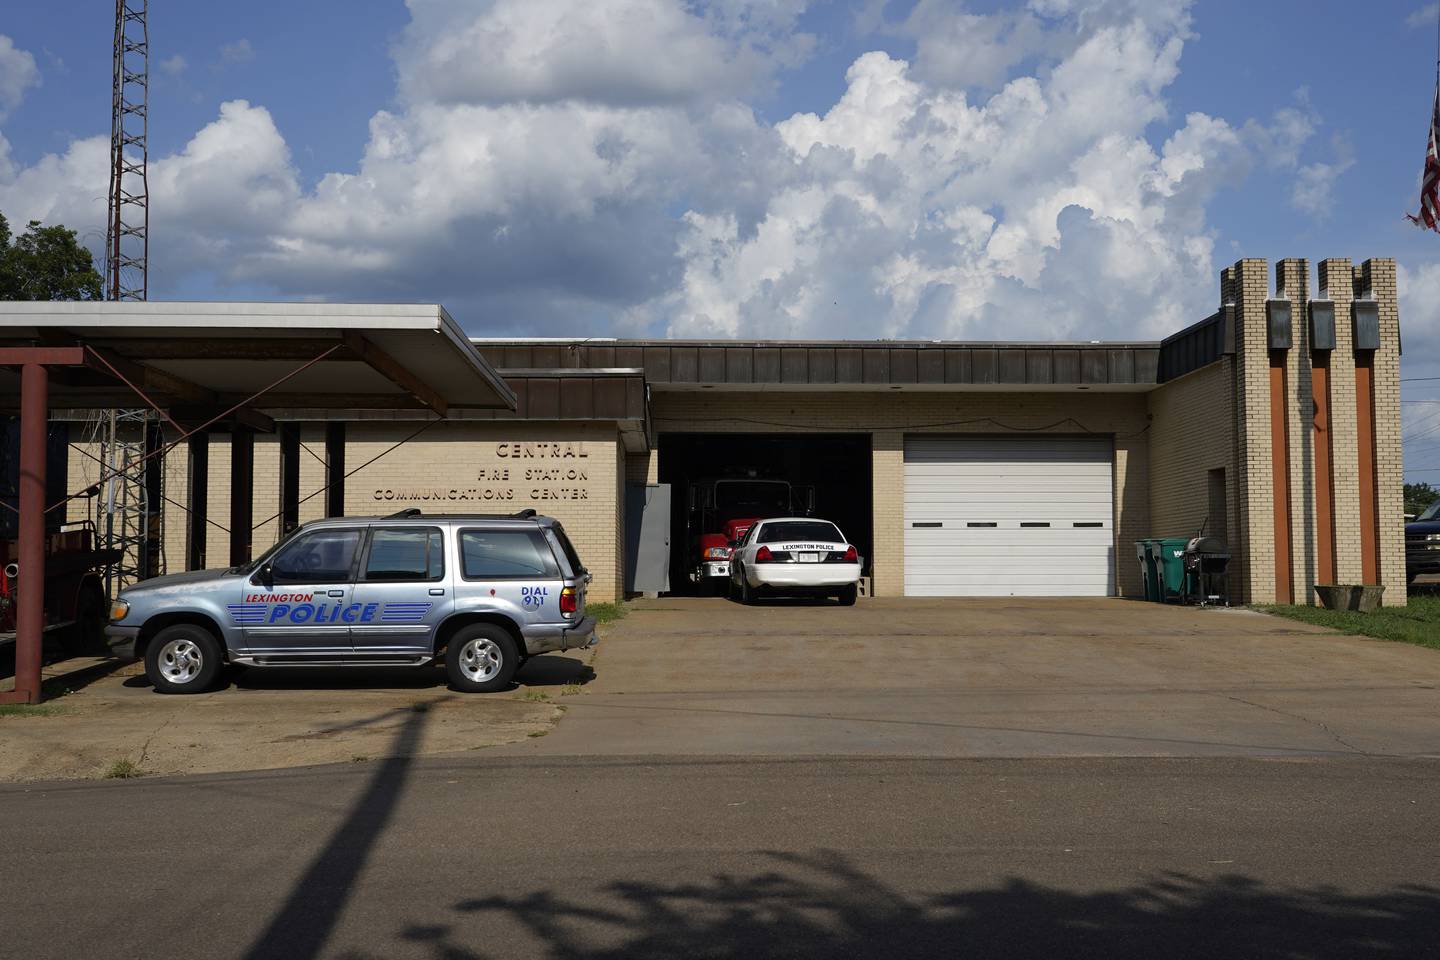 Lexington, Mississippi, police cruisers are parked outside their shared facility with the fire department. AP